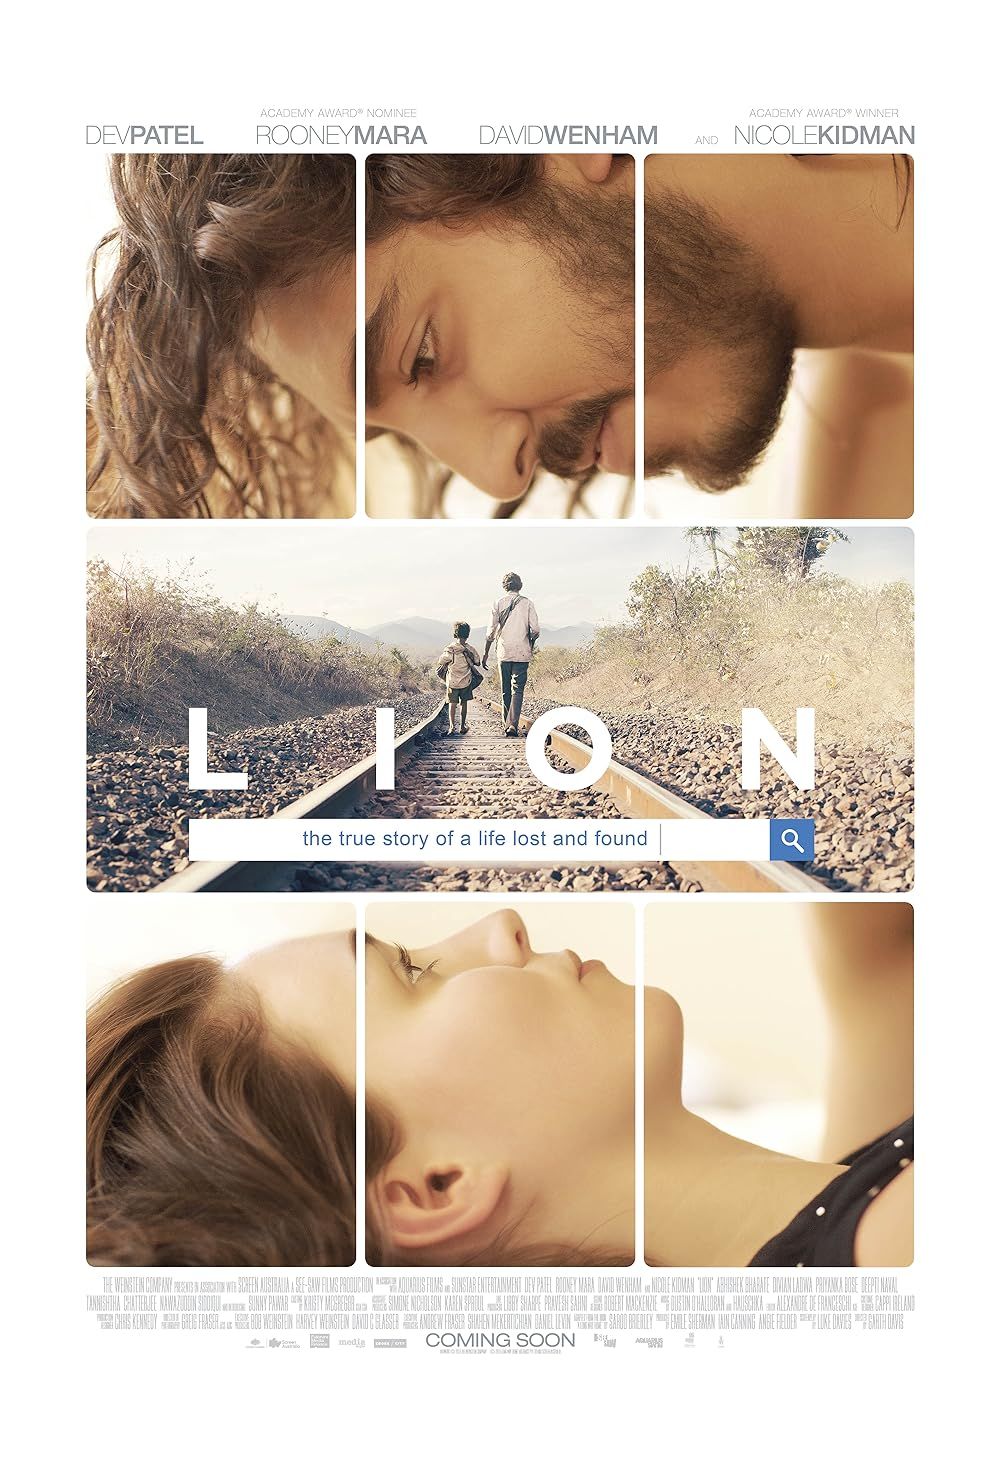 A composite image features Dev Patel, Rooney Mara, and two people walking along a railroad track in Lion